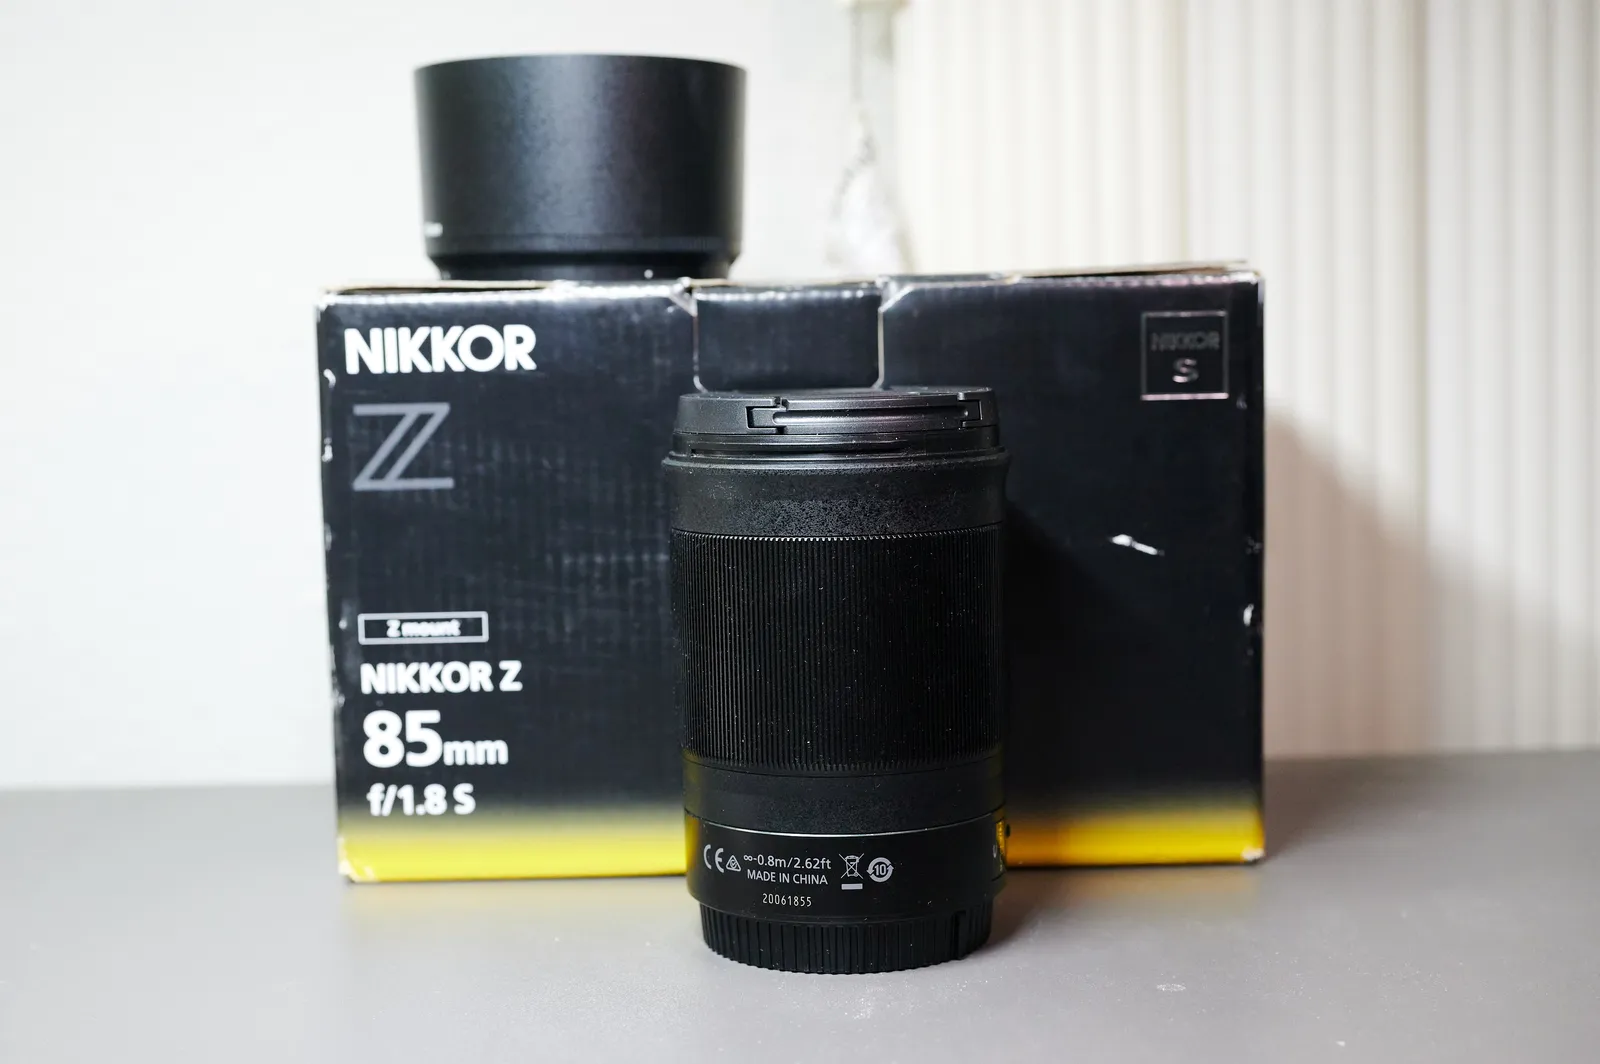 Nikon Nikkor Z 85mm f1.8 S Lens - with box From Tony's Gear Shop